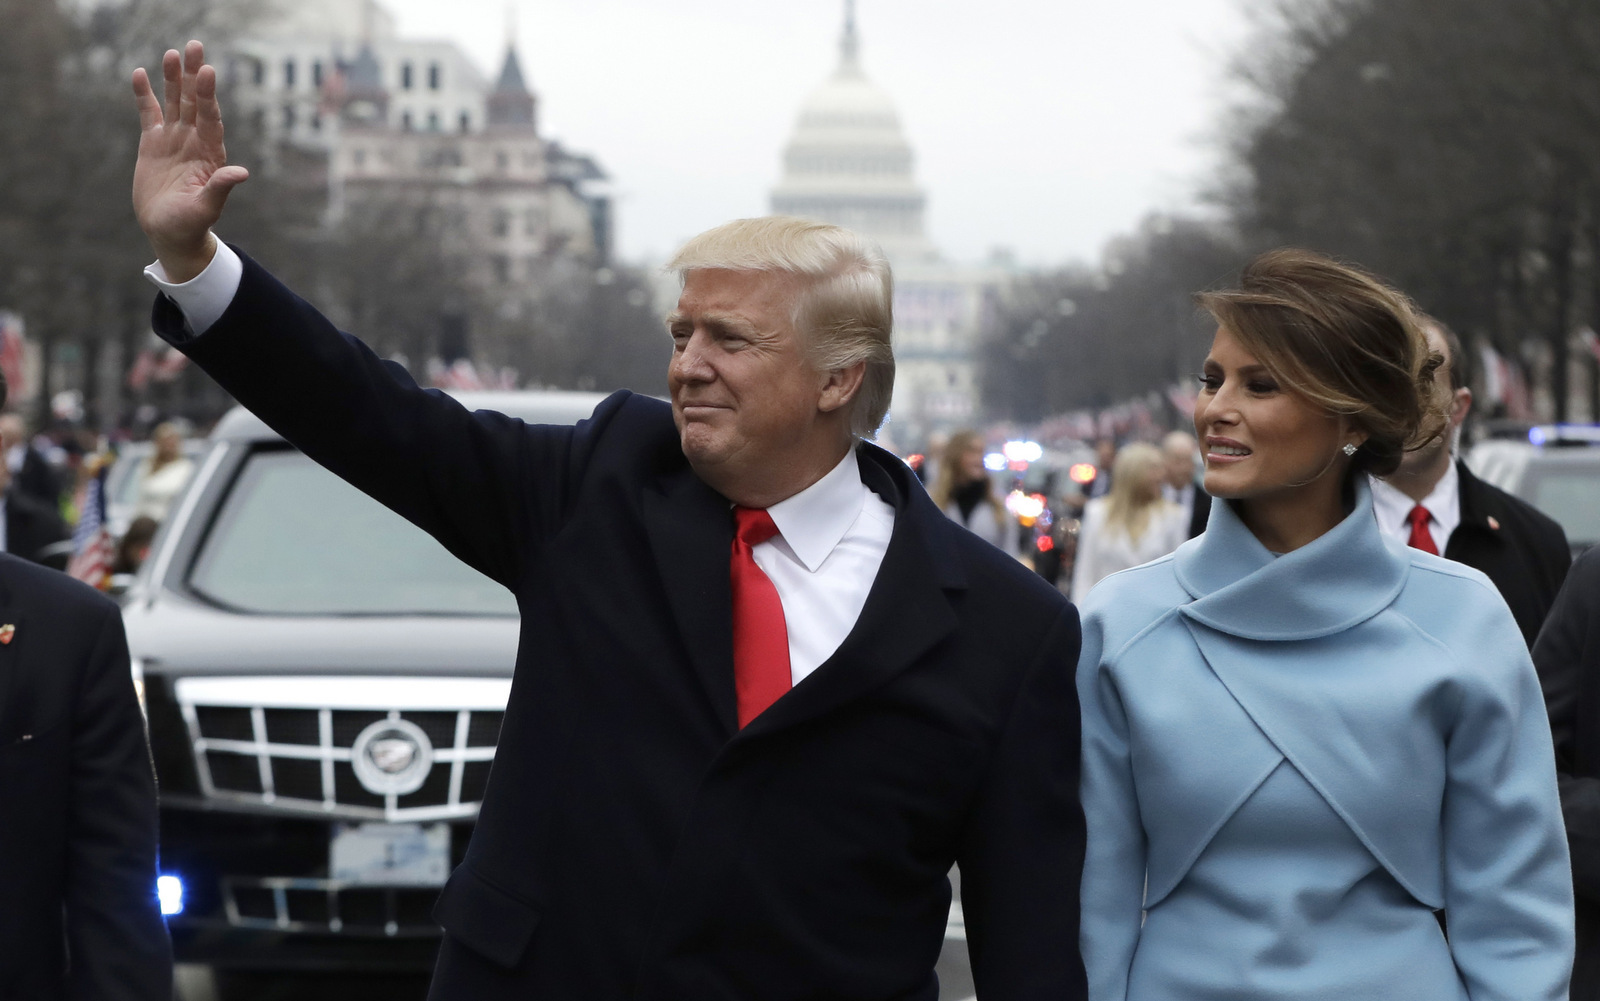 Donald Trump waves as he walks with first lady Melania Trump during the inauguration parade on Pennsylvania Avenue in Washington. Trump raised $107 million for his inaugural festivities.  (AP/Evan Vucci)